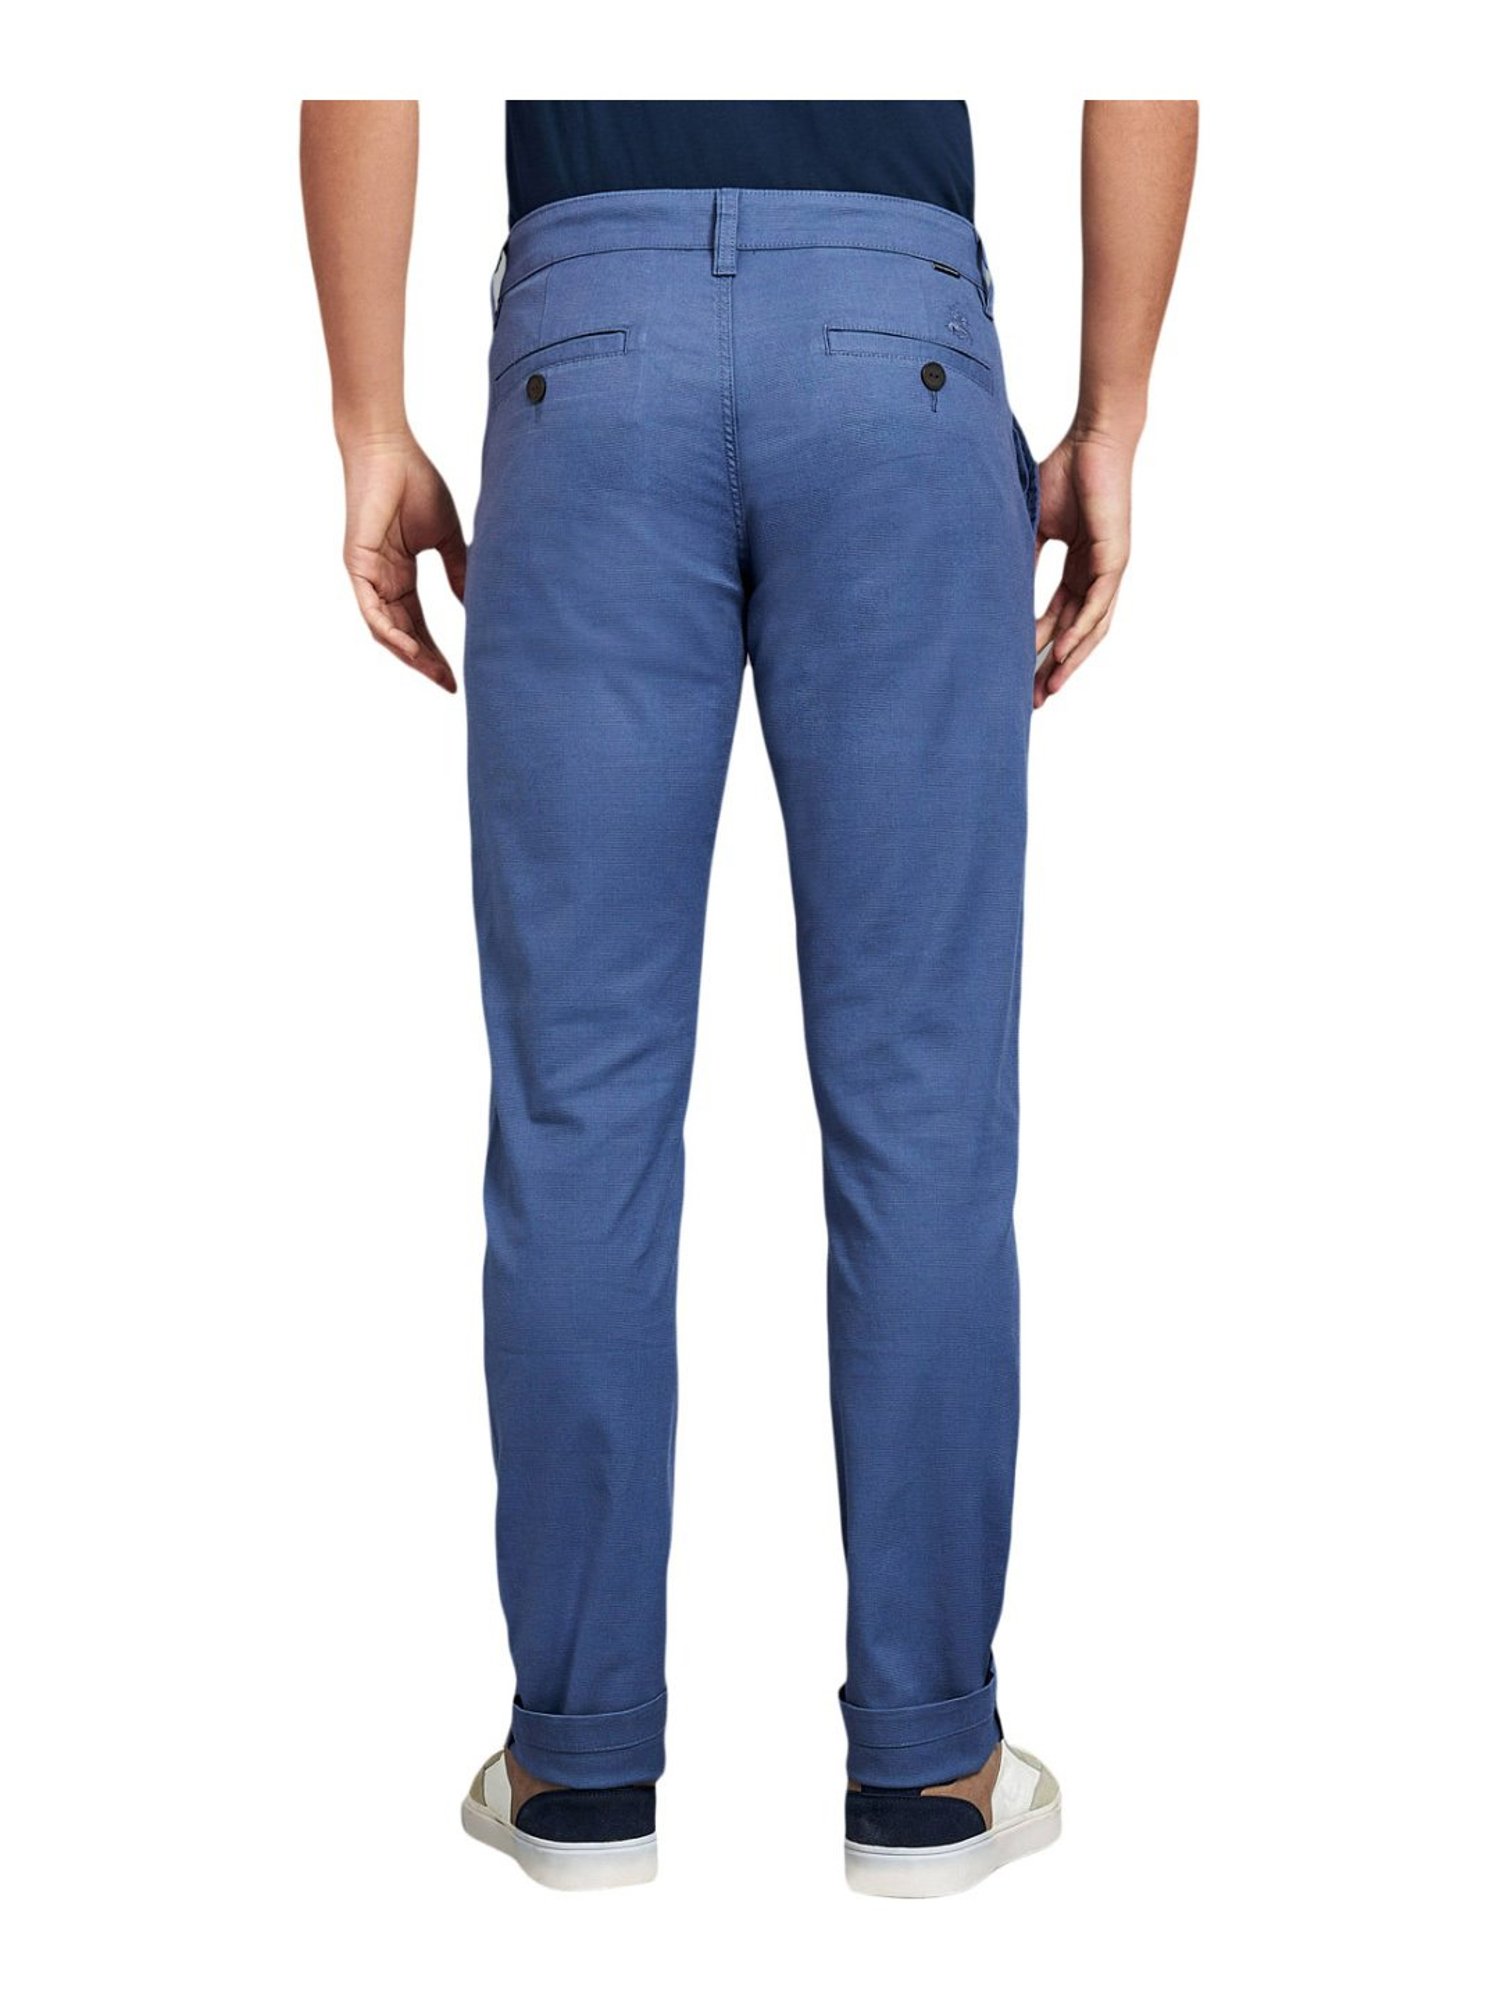 Buy Khaki Trousers  Pants for Men by Beverly Hills Polo Club Online   Ajiocom